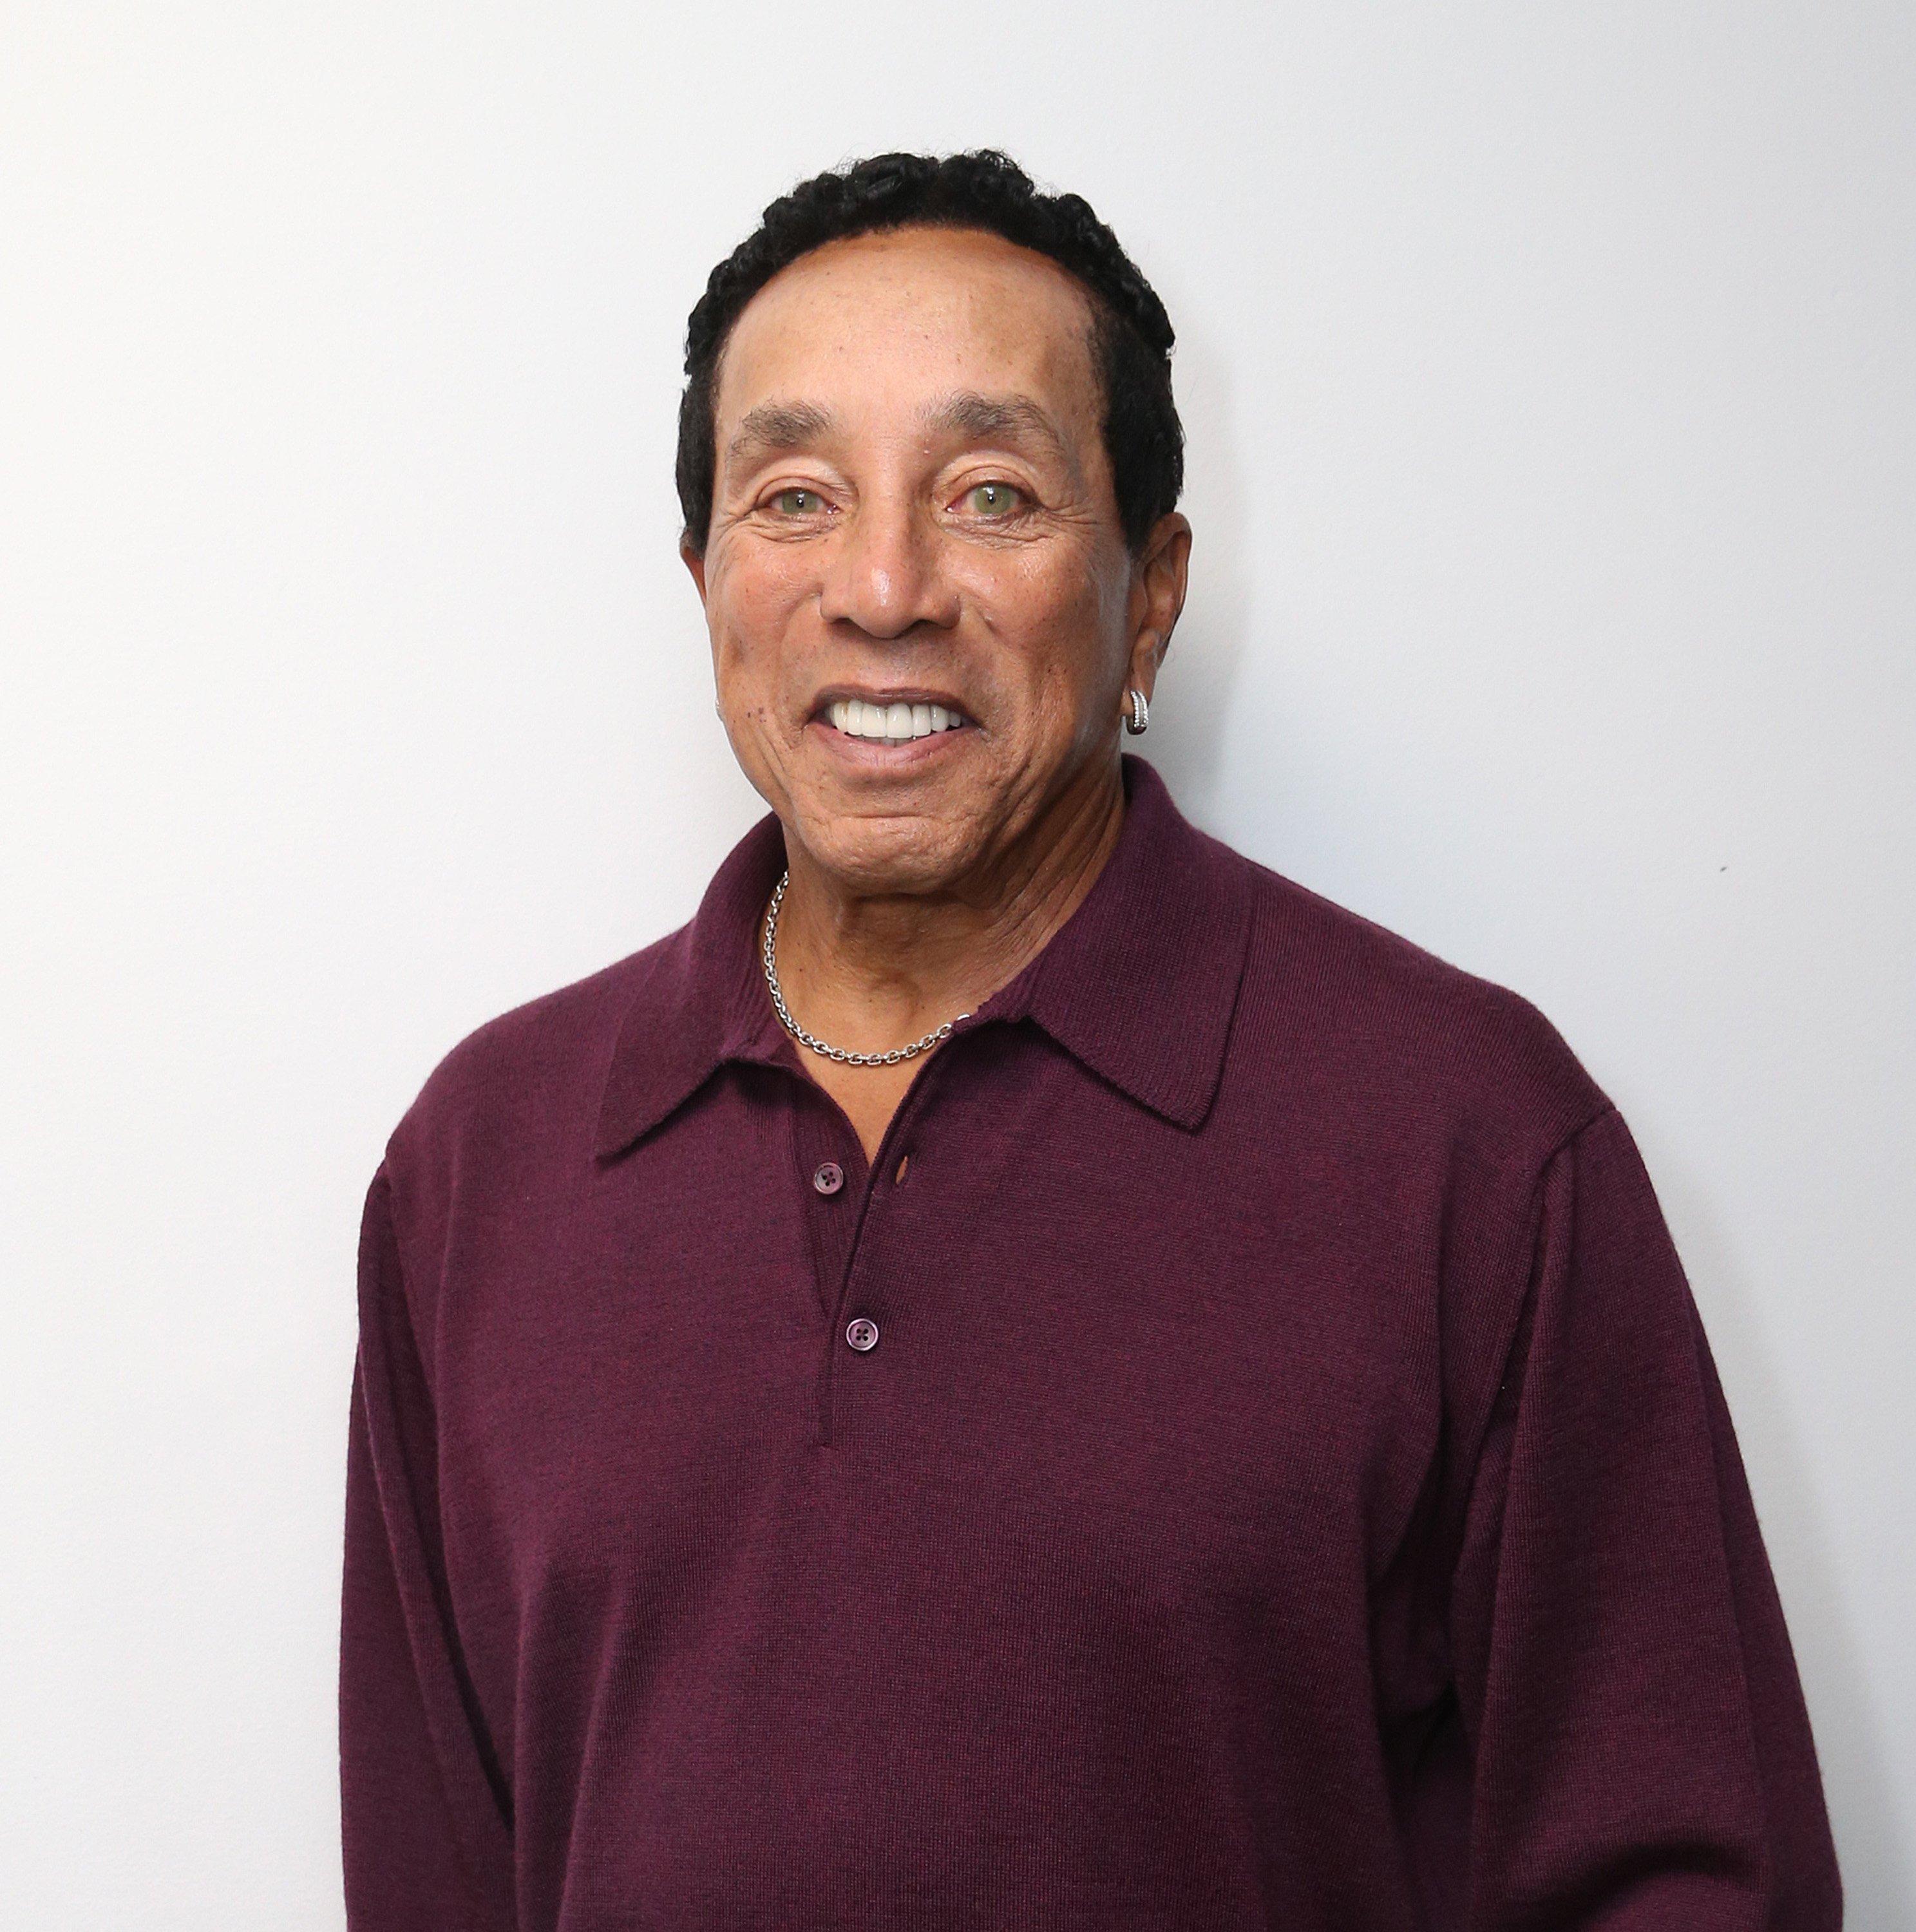 Smokey Robinson photographed in 2016